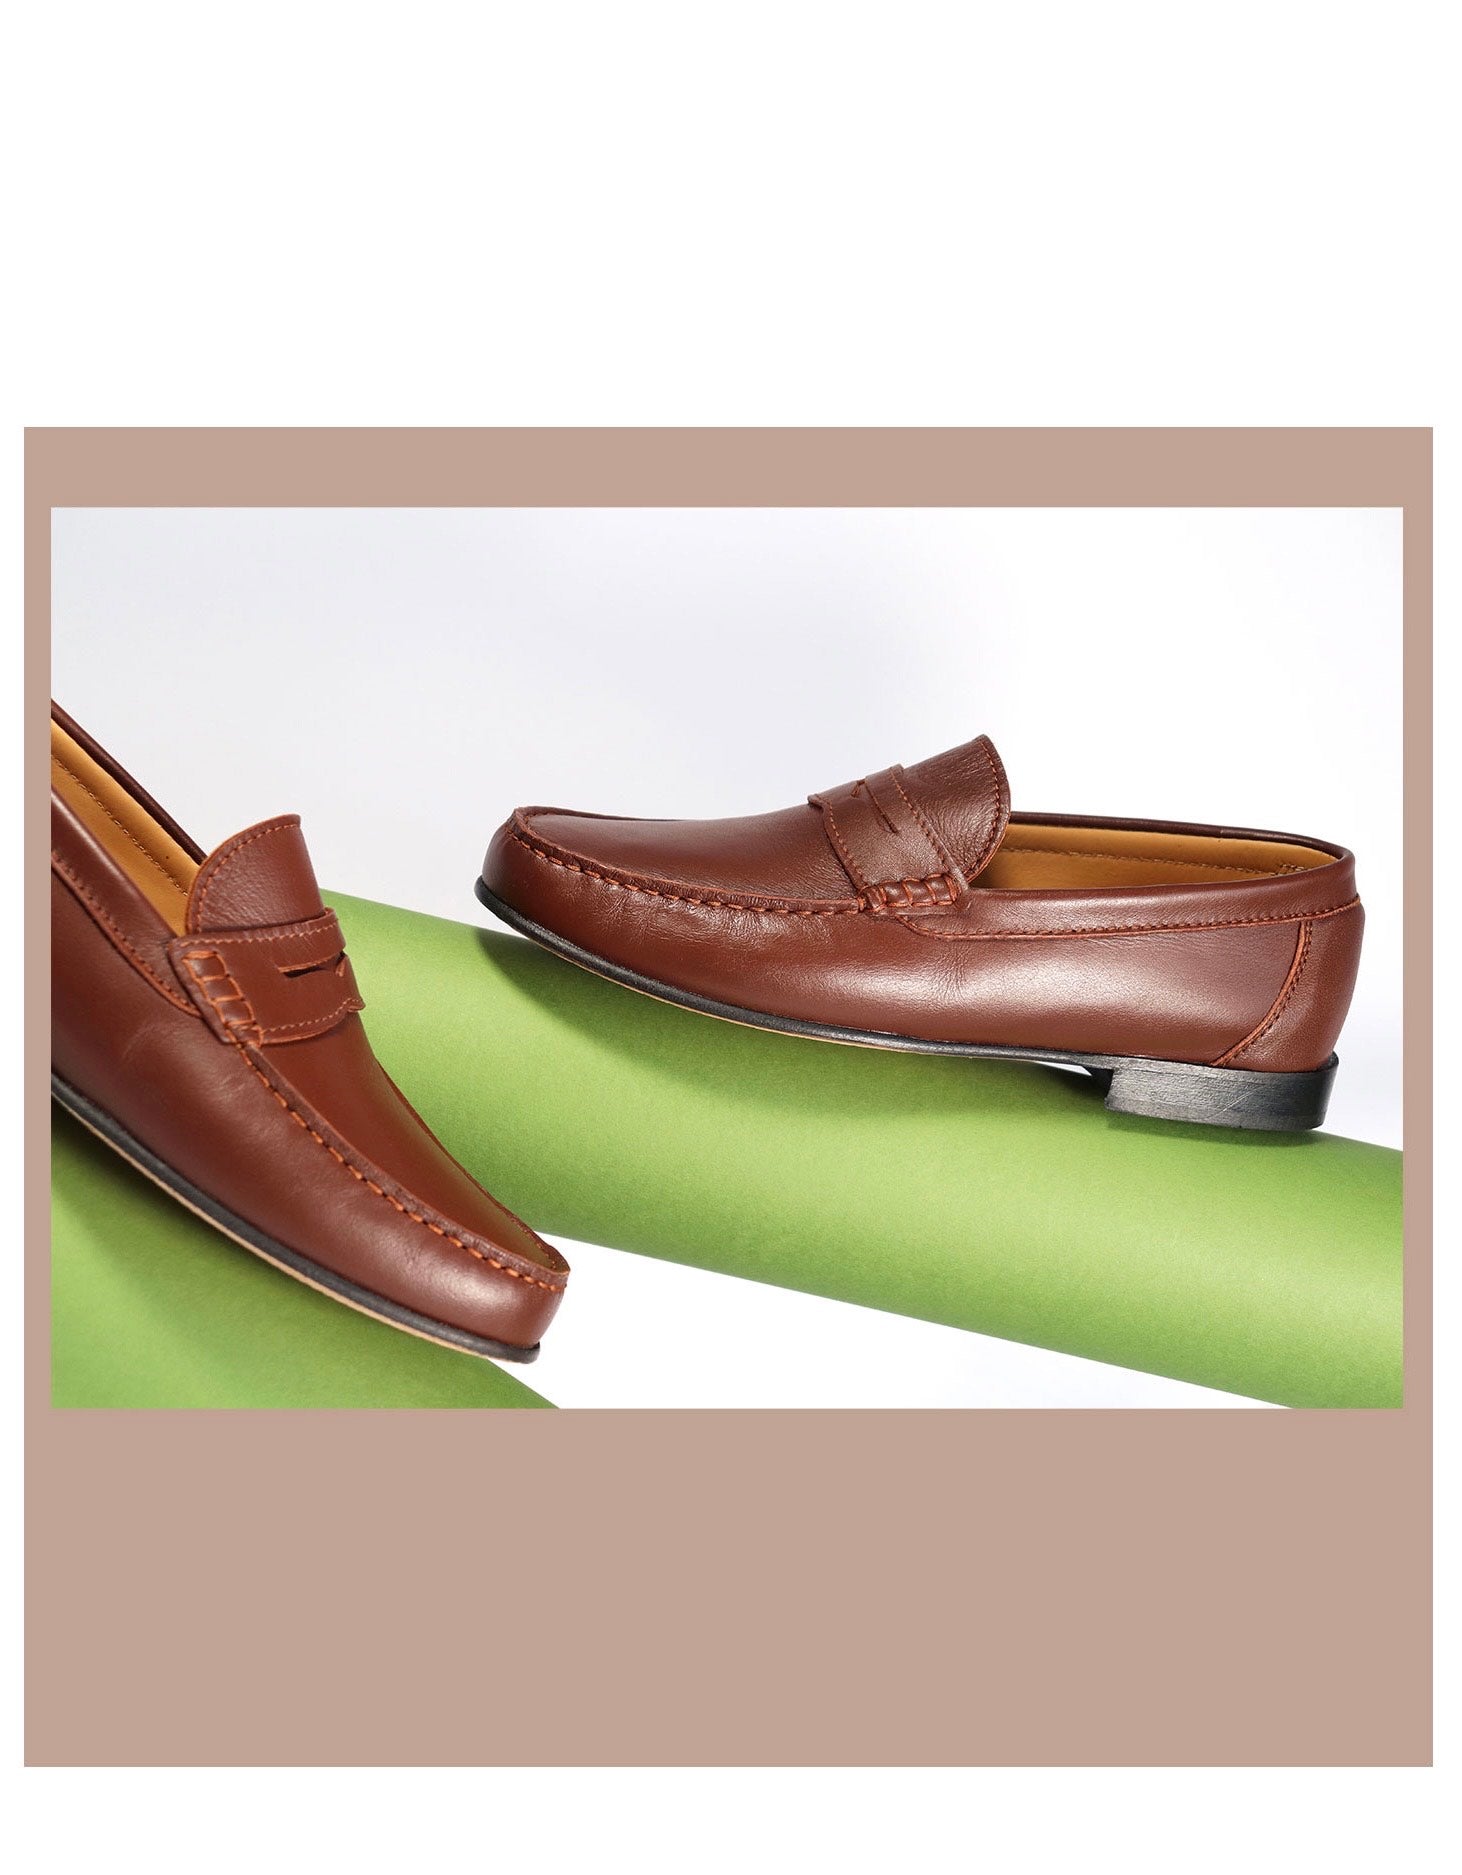 Hugs & Co. men's shoes and loafers